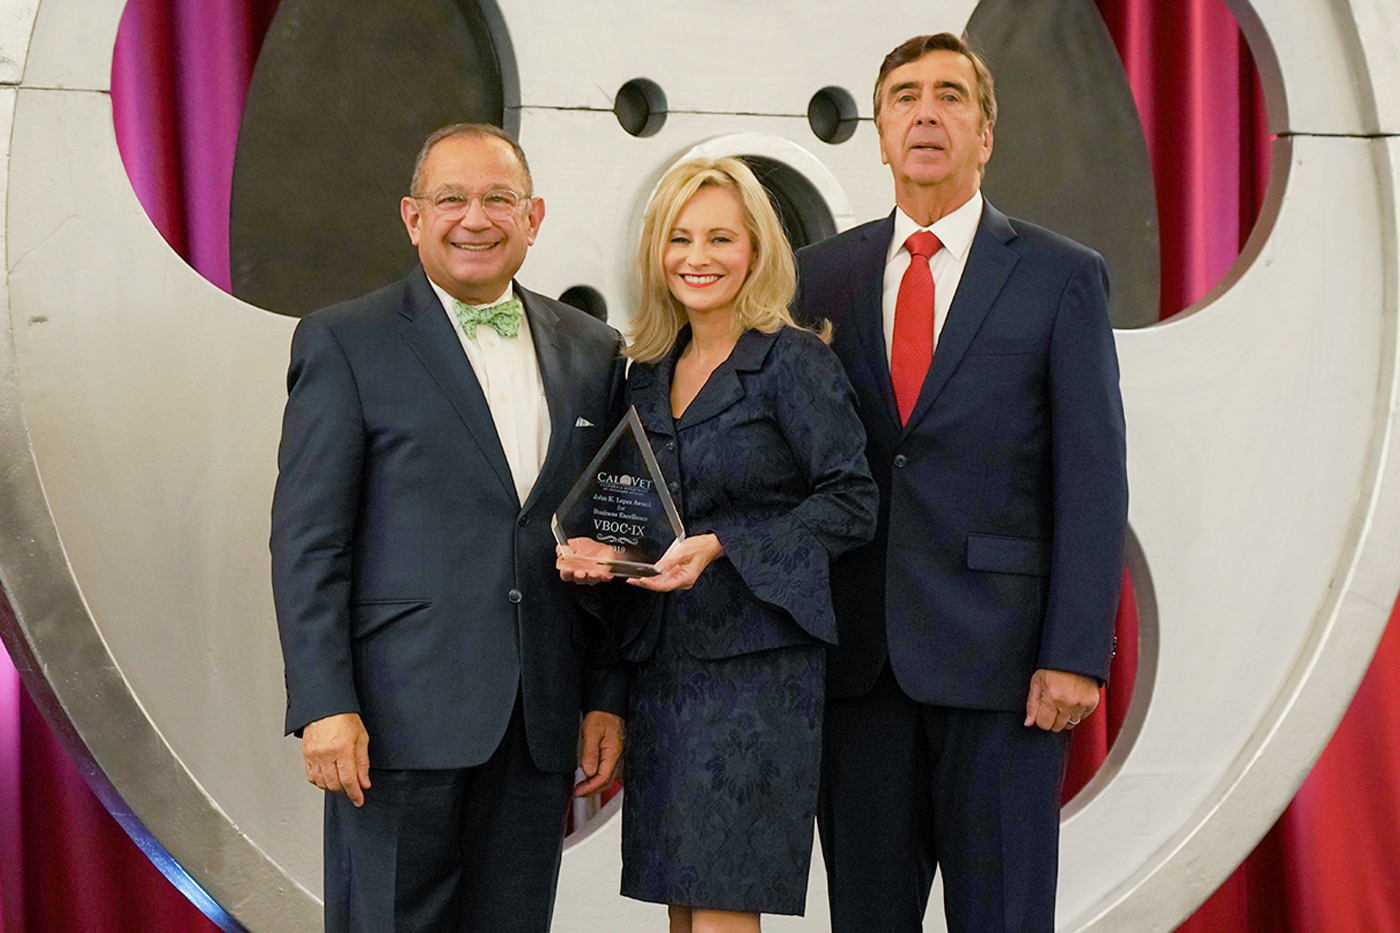 Vito Imbasciani, Secretary of the California Department of Veterans Affairs presents the Veterans Business Outreach Center, Region IX, with the John K. Lopez award for Business Excellence. Coreena Conley, President and CEO, and Robert Beamer, Chairman of the Board, accept the award.